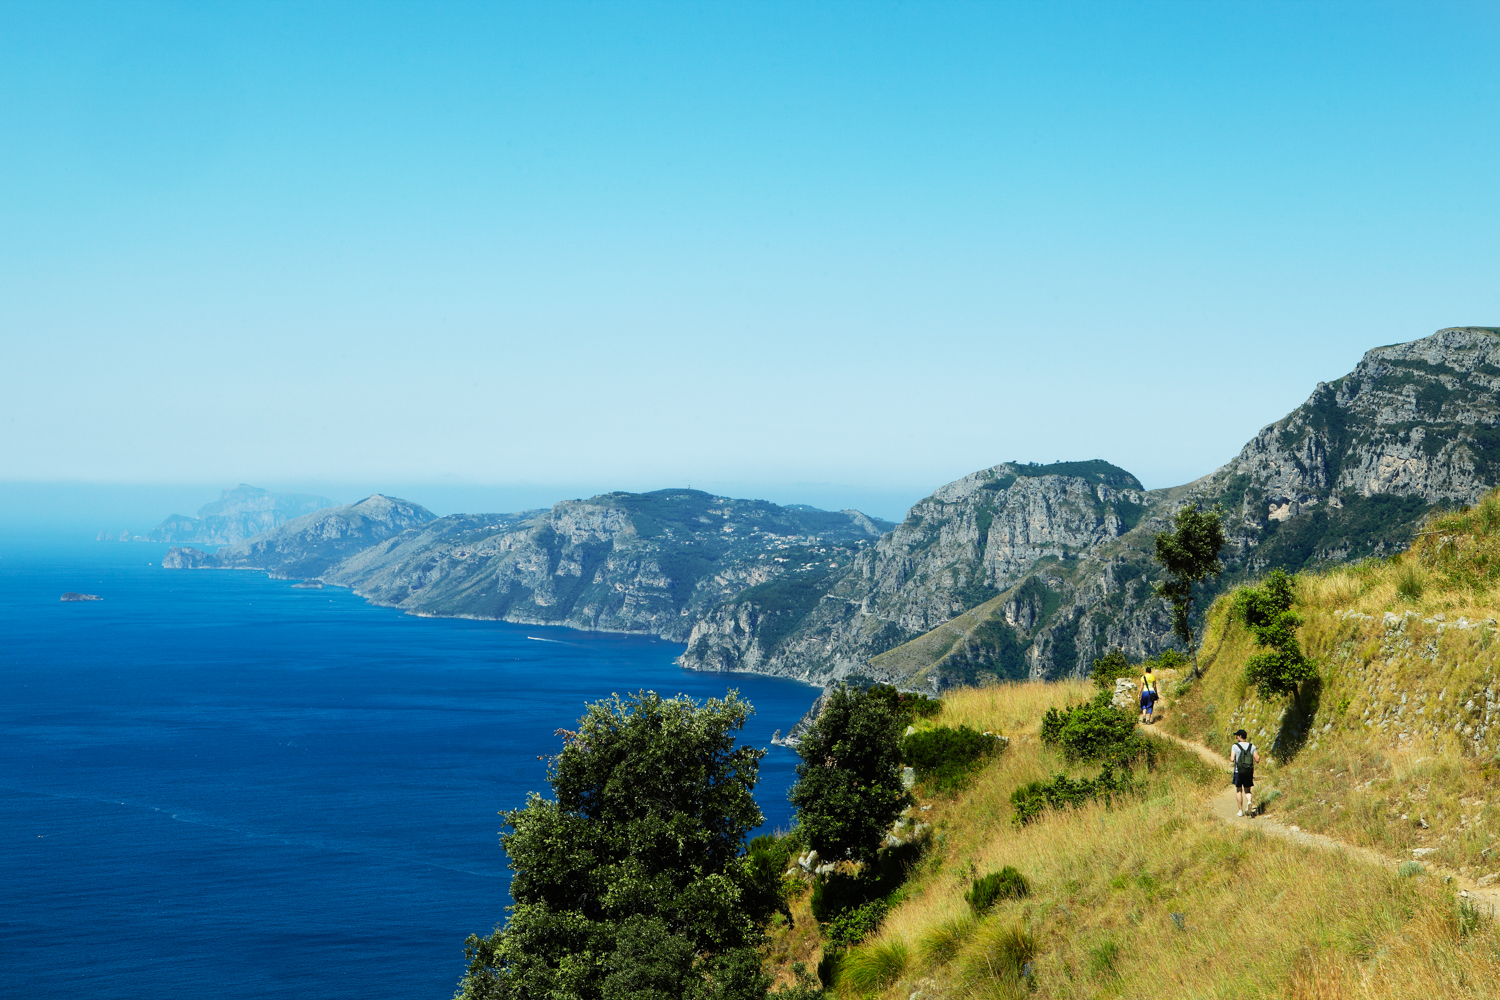 A hike along Sentiero degli Dei (Path of the Gods) provides incredible views of the Amalfi Coast and the island of Capri. Image by Mark Read / Lonely Planet